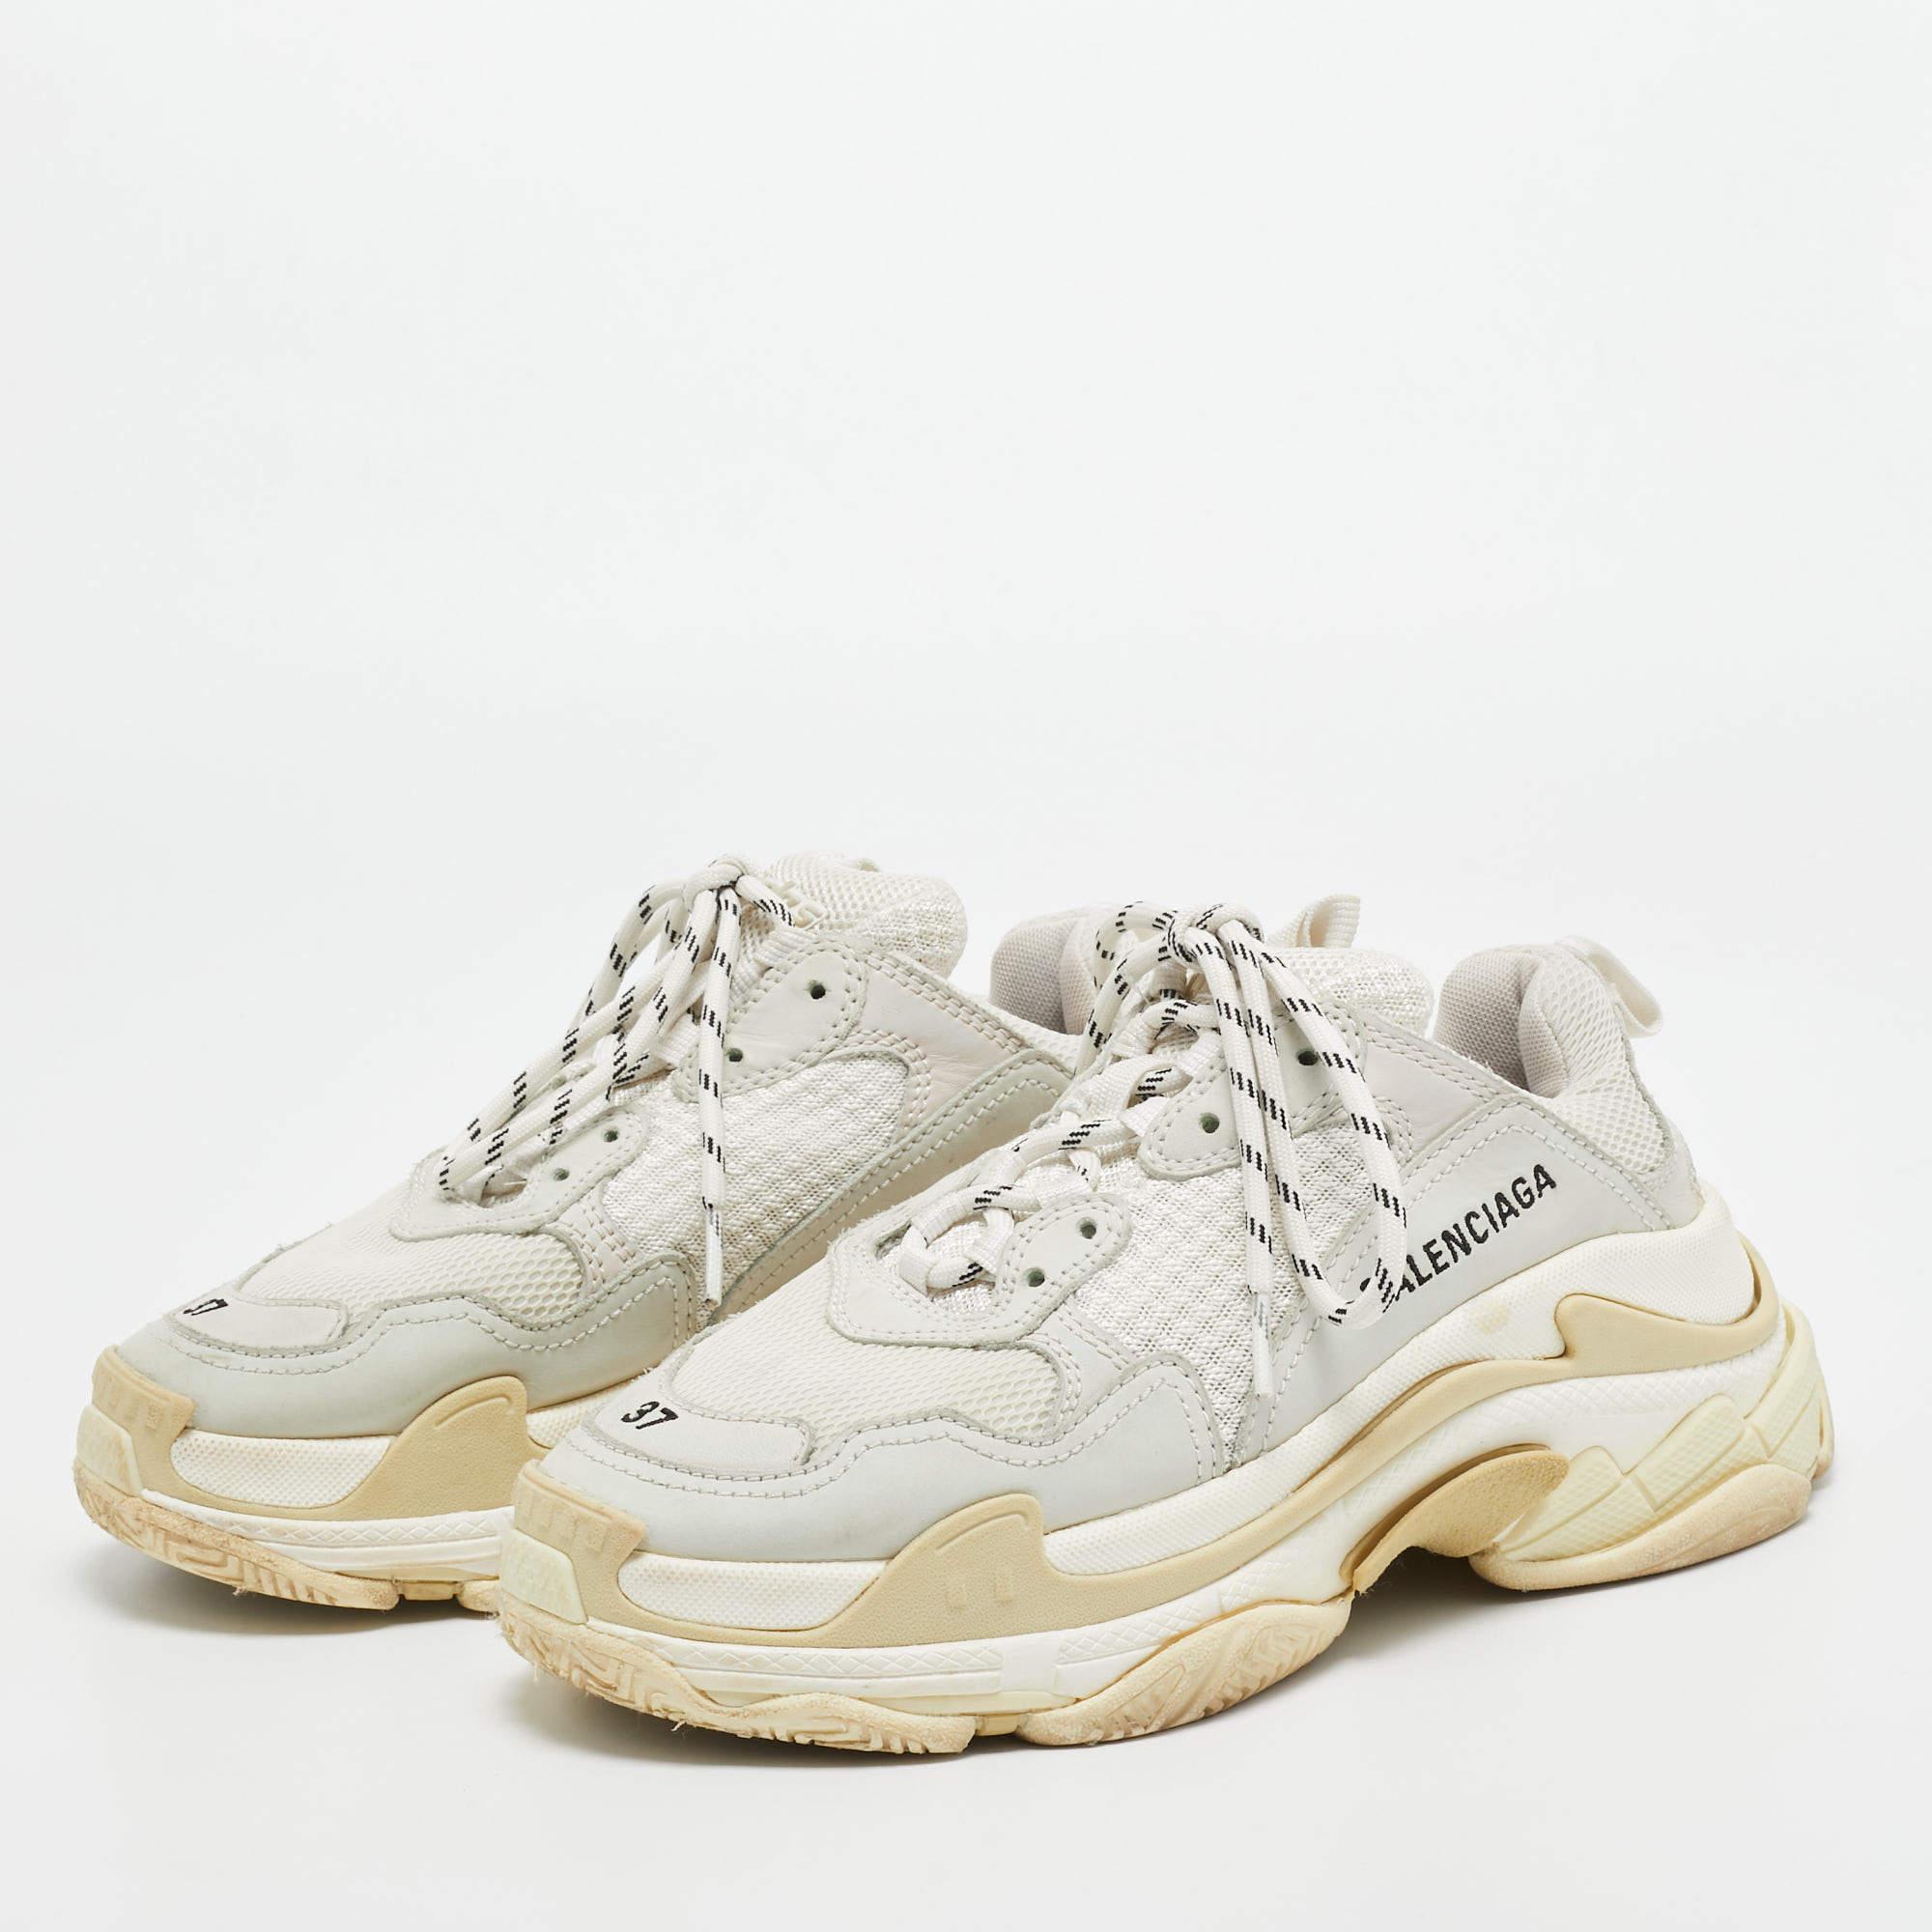 Balenciaga White/Grey Mesh and Leather Triple S Sneakers Size 37 For Sale 2